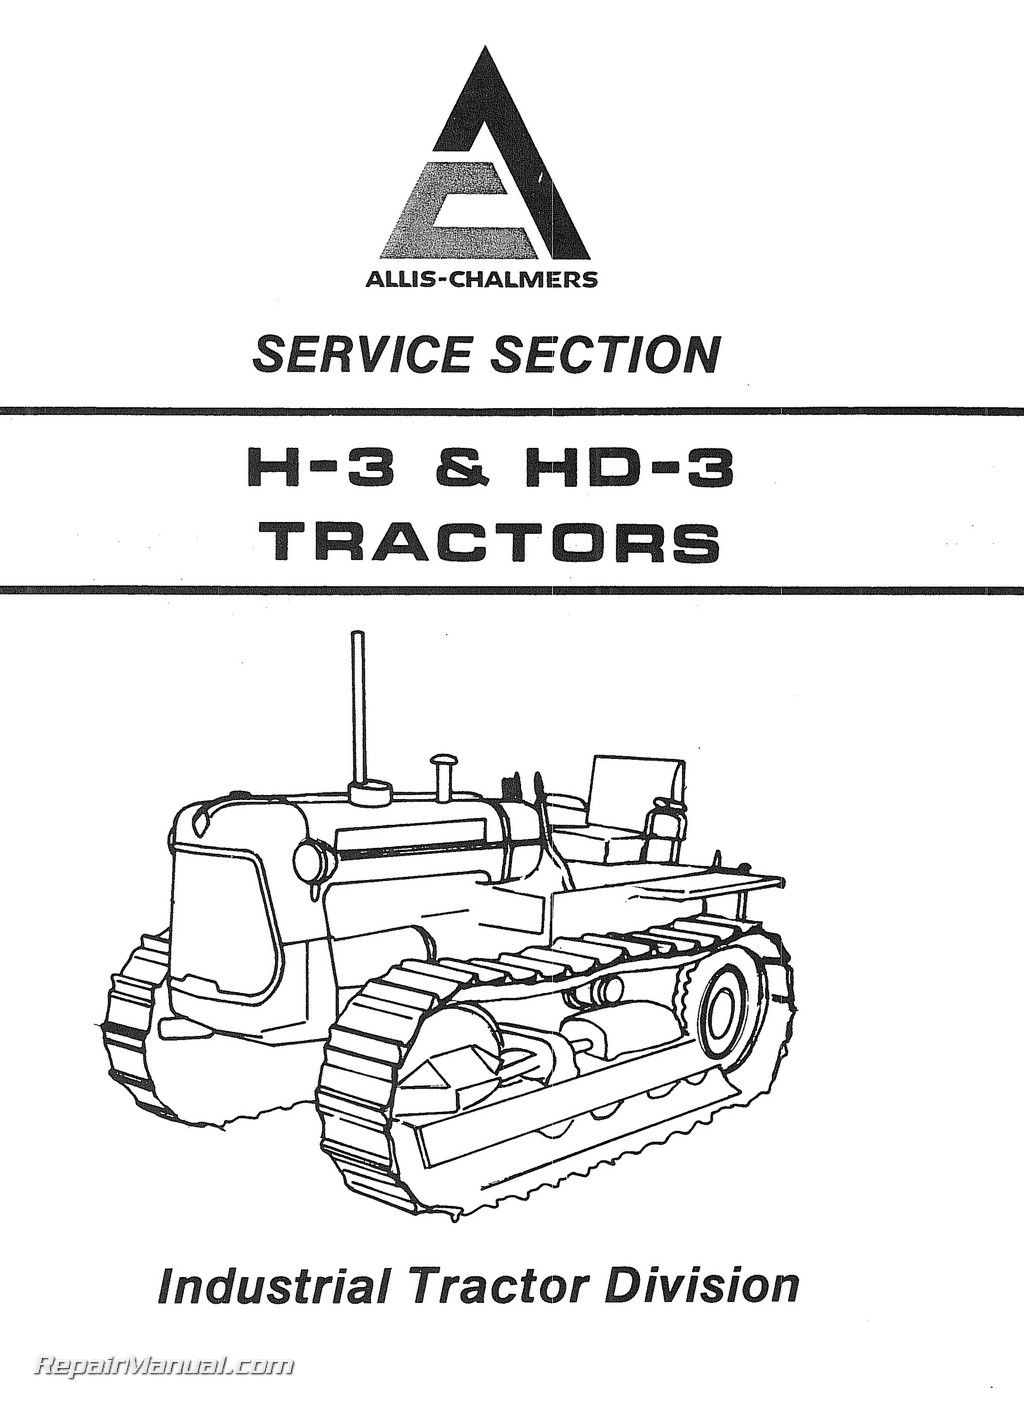 New FREE SHIPPING Allis Chalmers H3 & HD3 Service Manual 